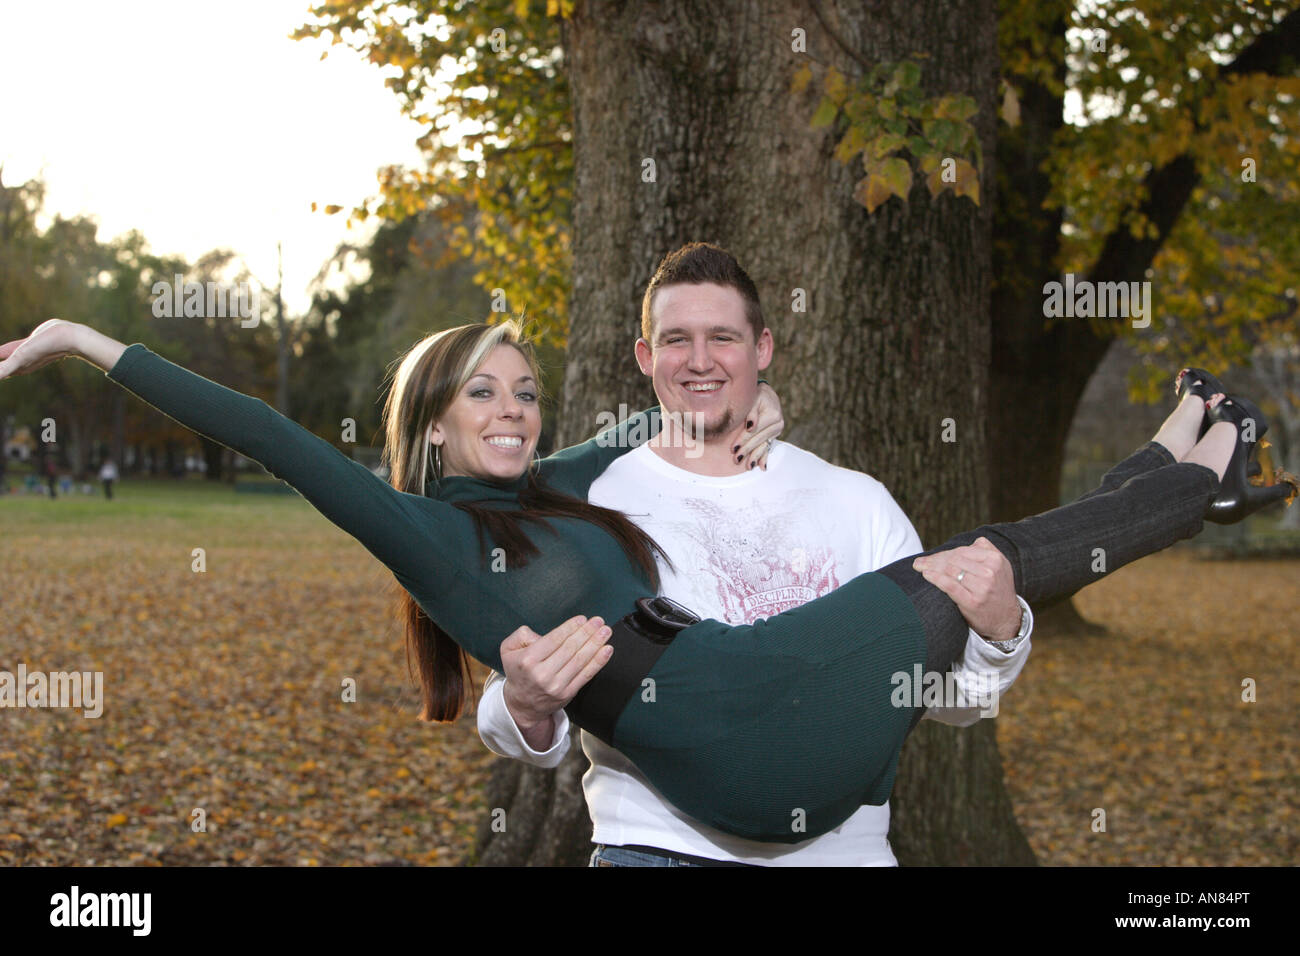 A young couple having fun at the park Stock Photo